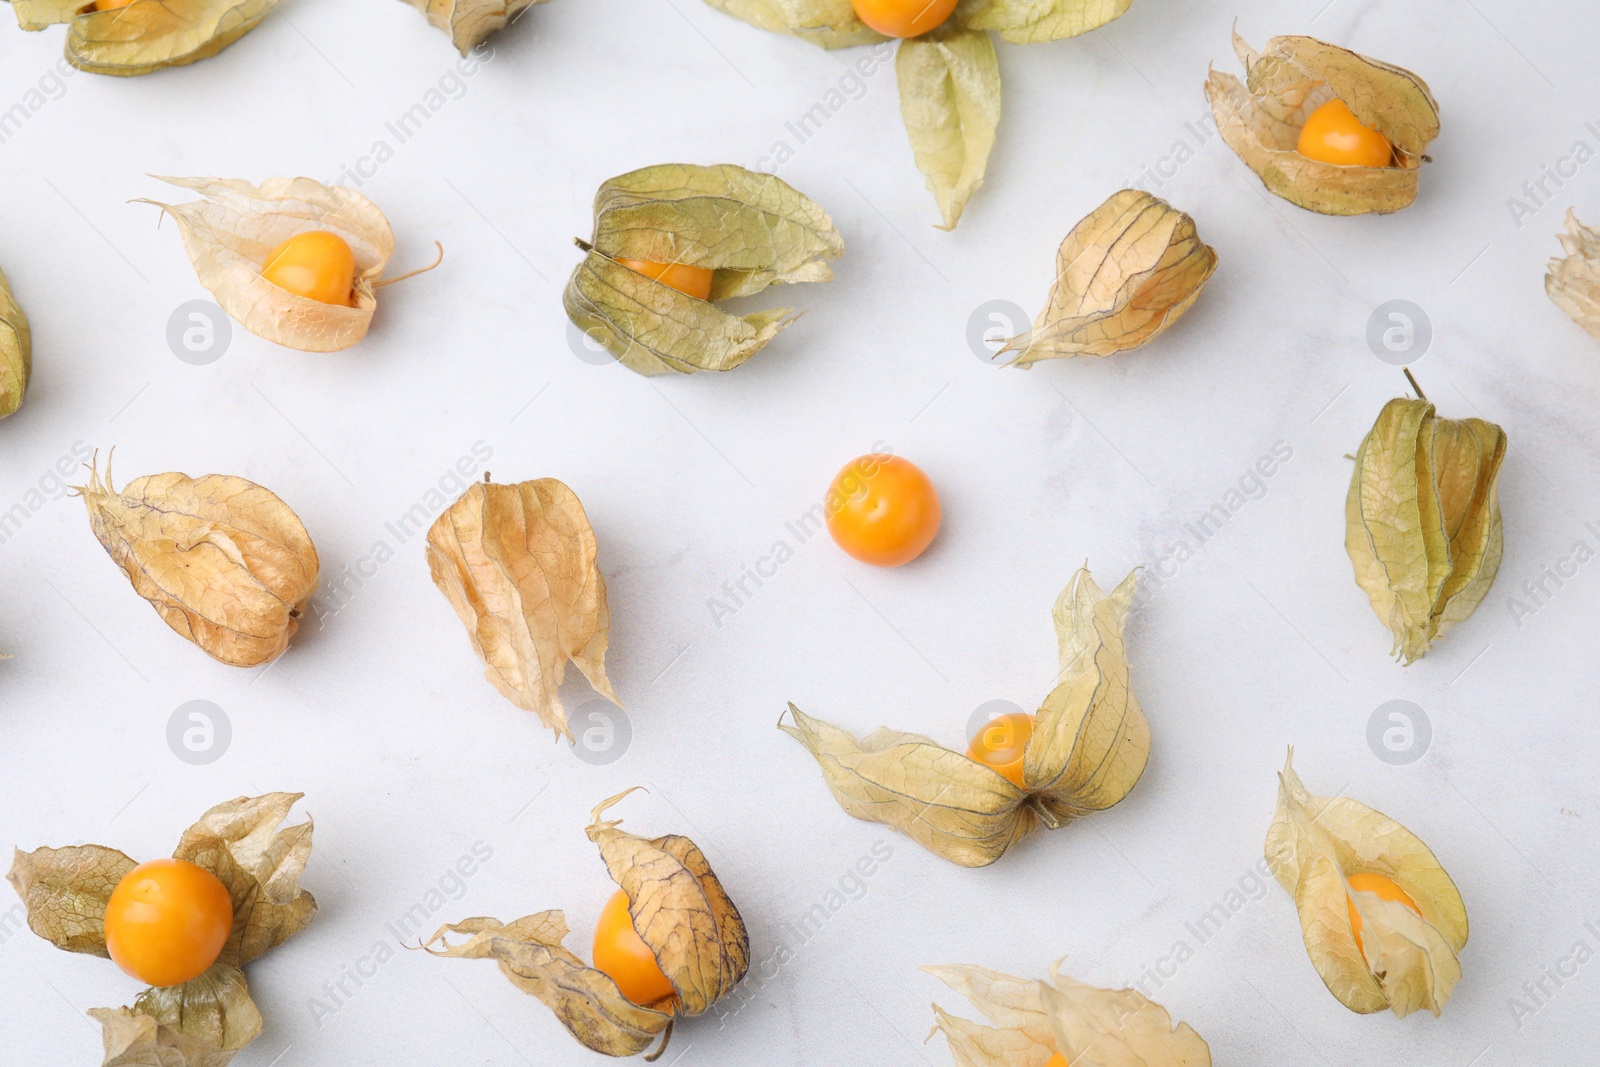 Photo of Ripe physalis fruits with calyxes on white marble table, flat lay